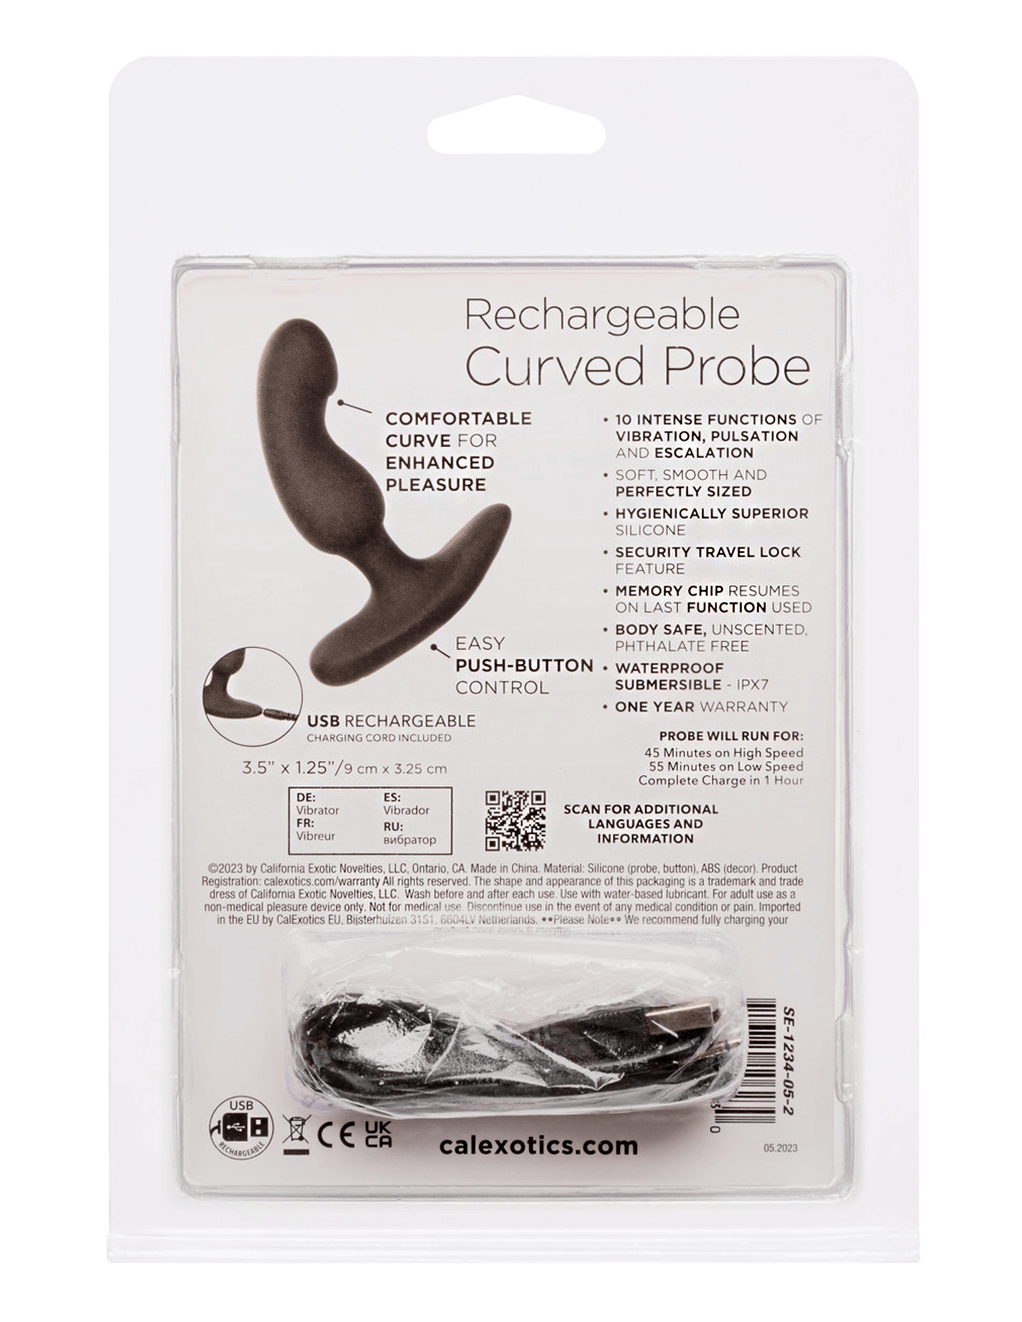 Rechargeable Curved Probe - Box Back